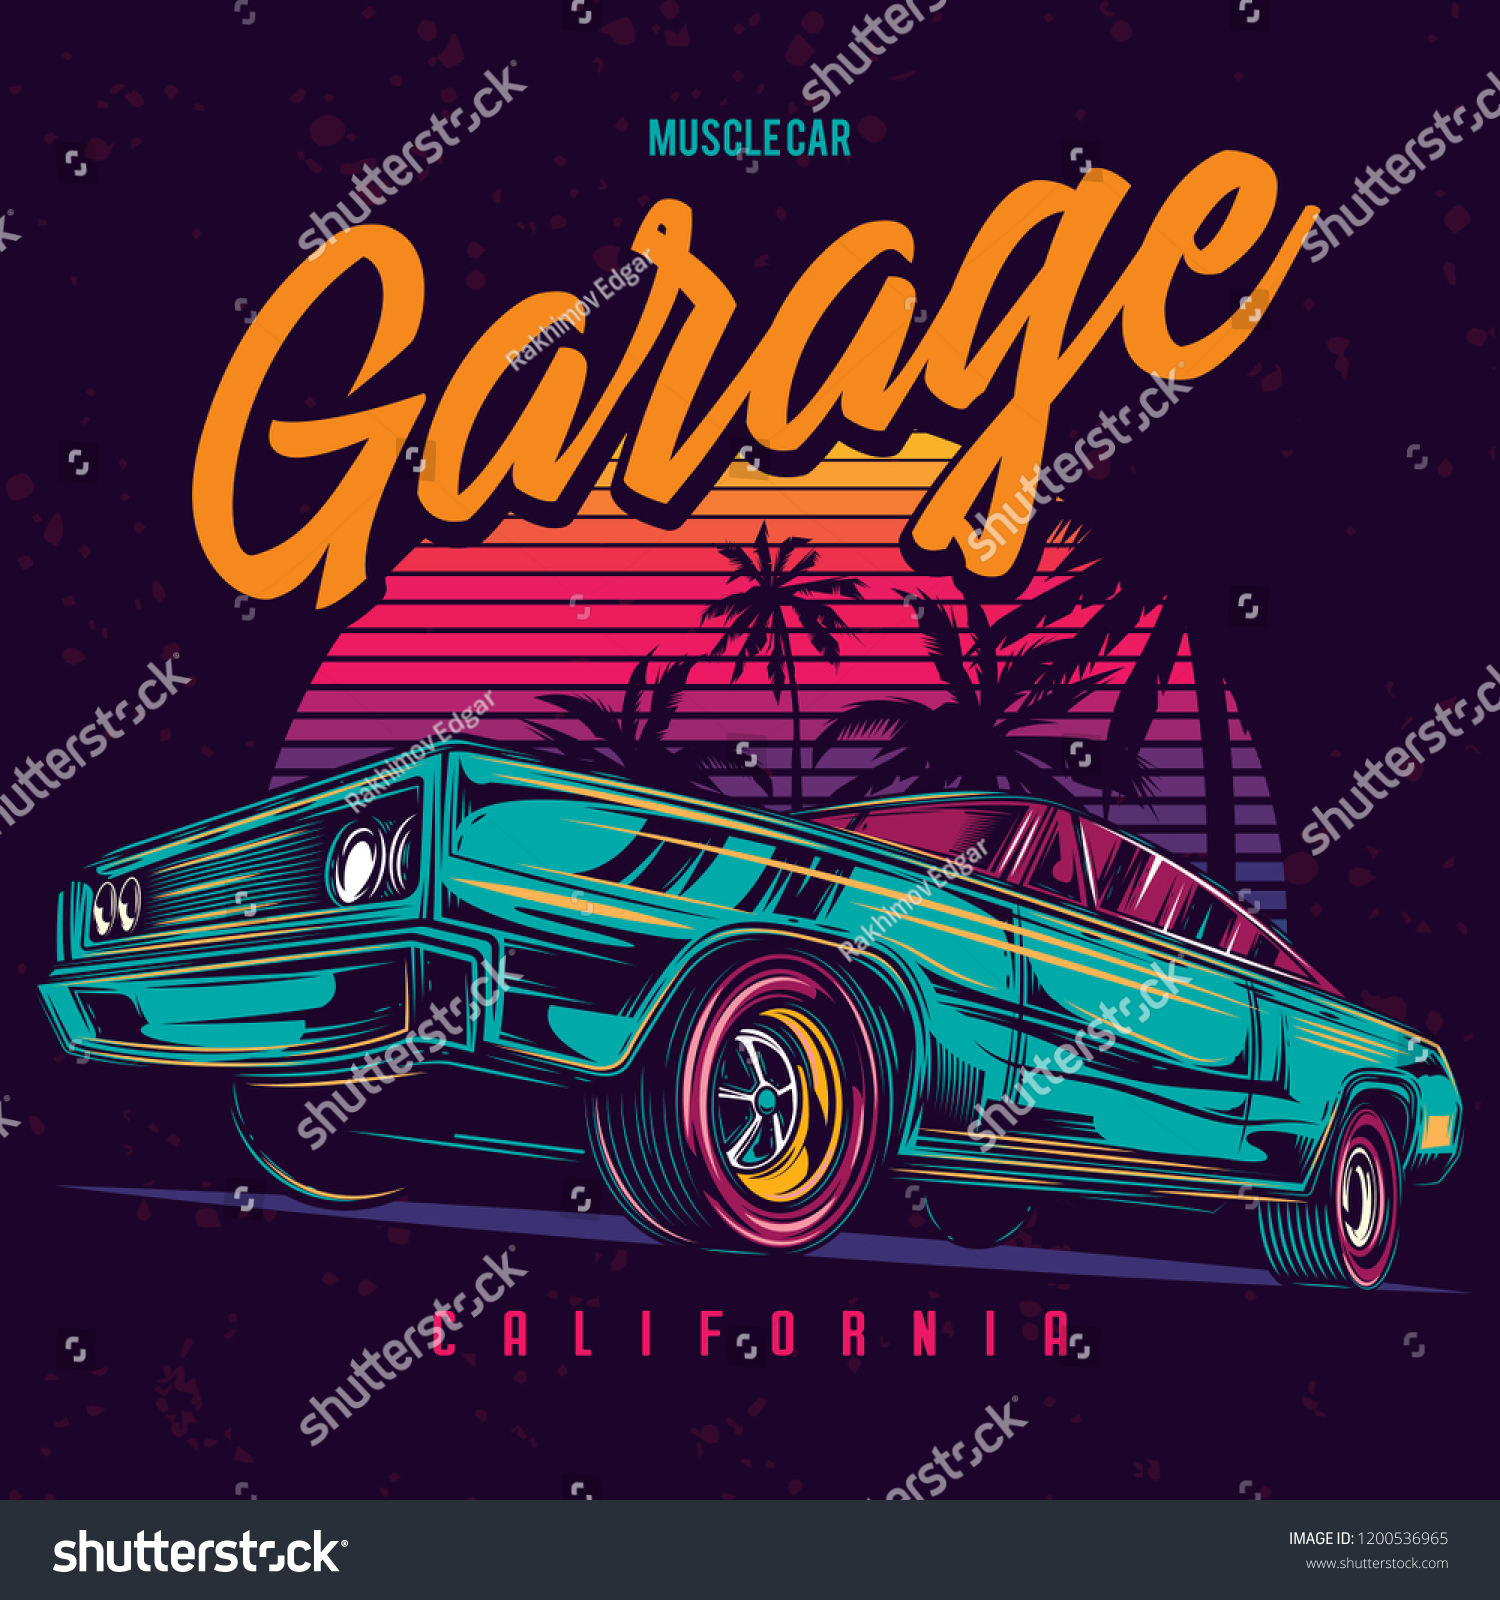 Original vector illustration of an American muscle car in retro neon style. #1200536965